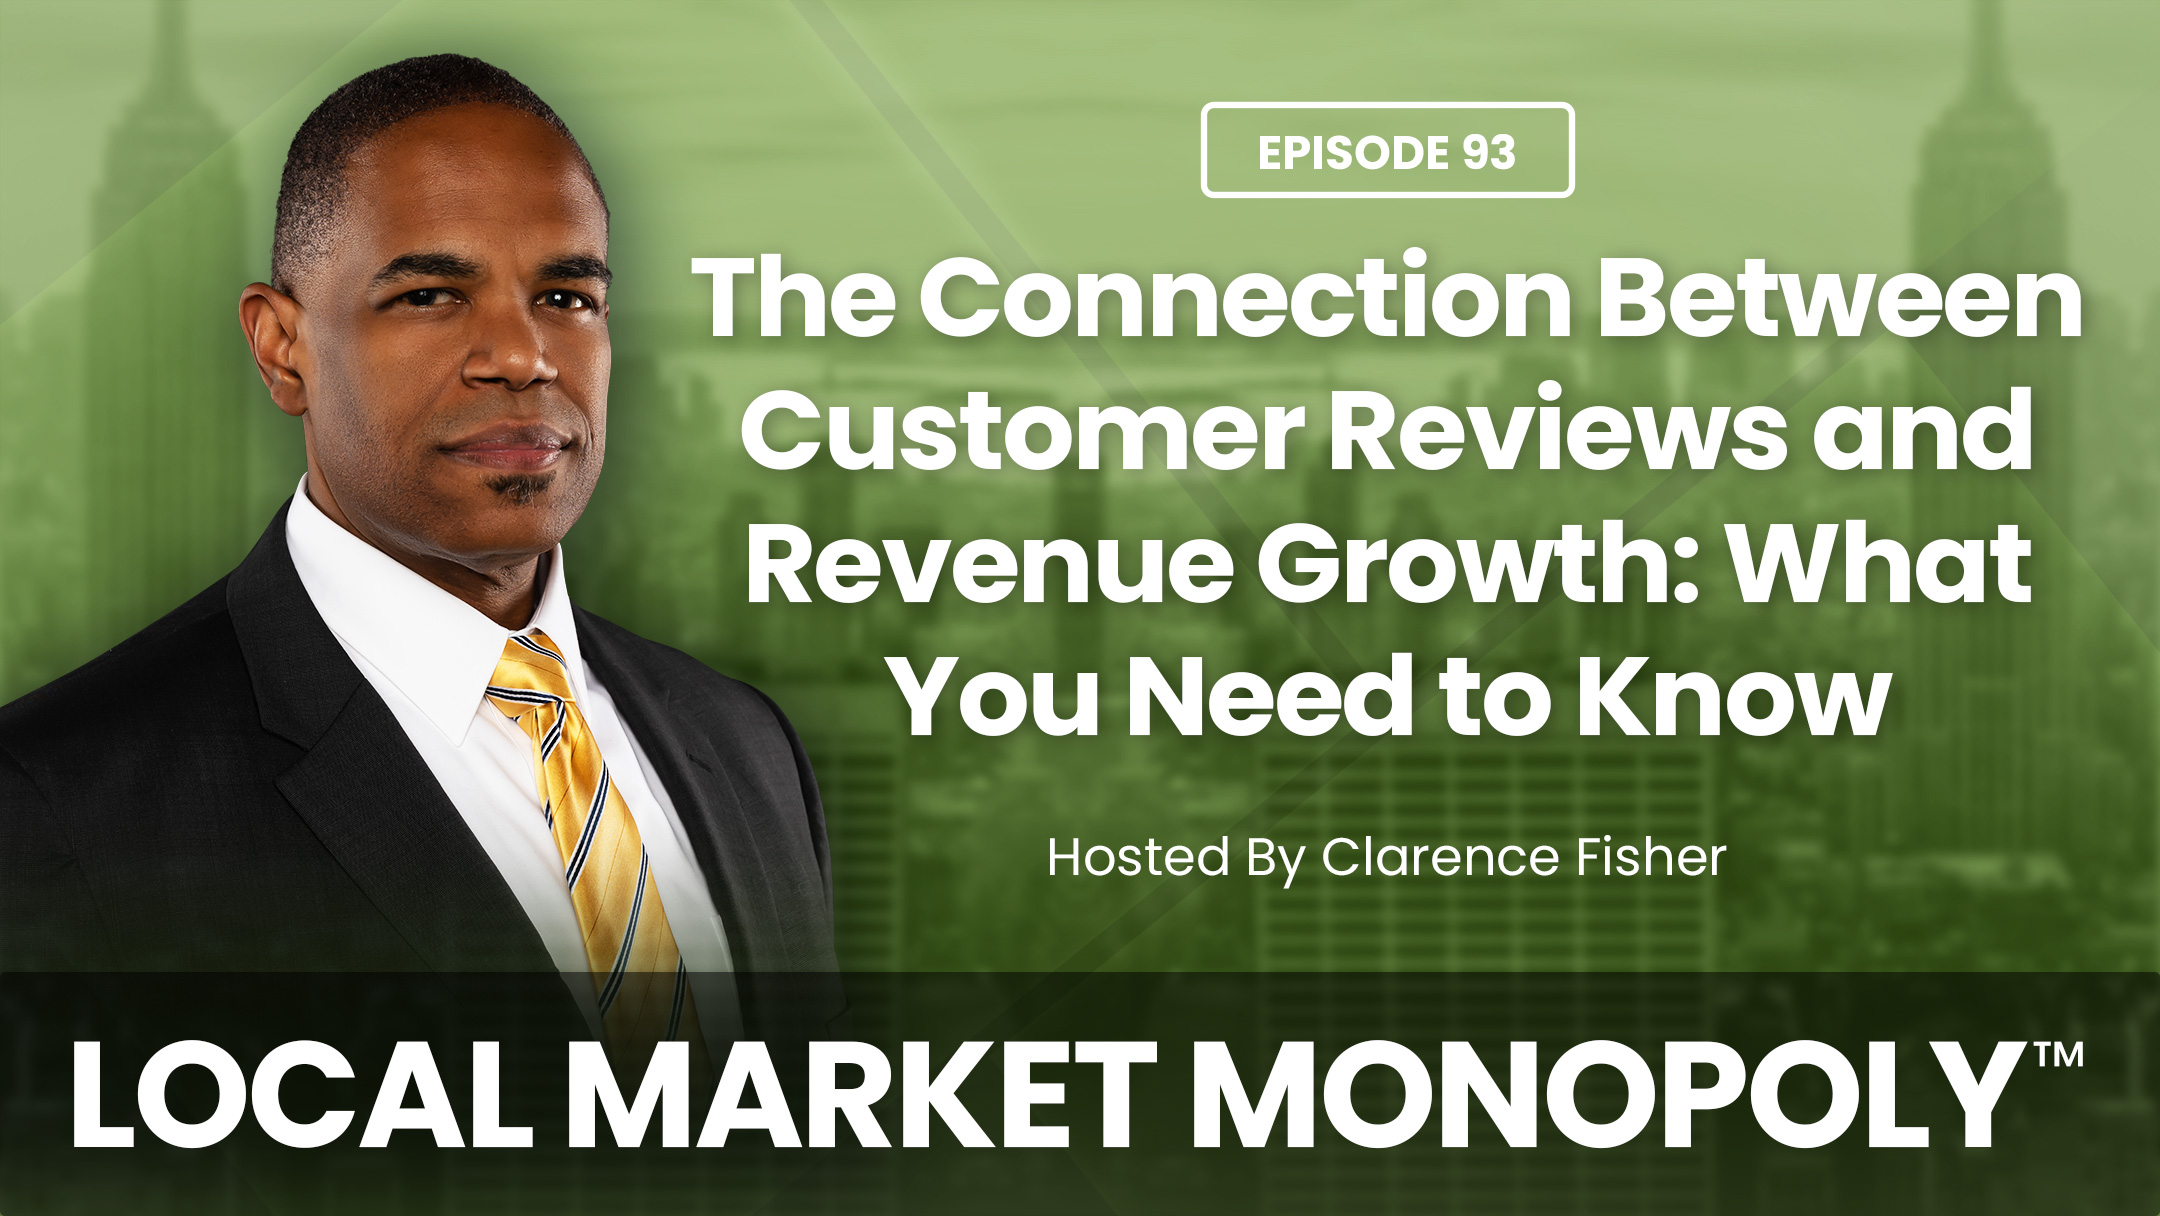 The Connection Between Customer Reviews and Revenue Growth: What You Need to Know